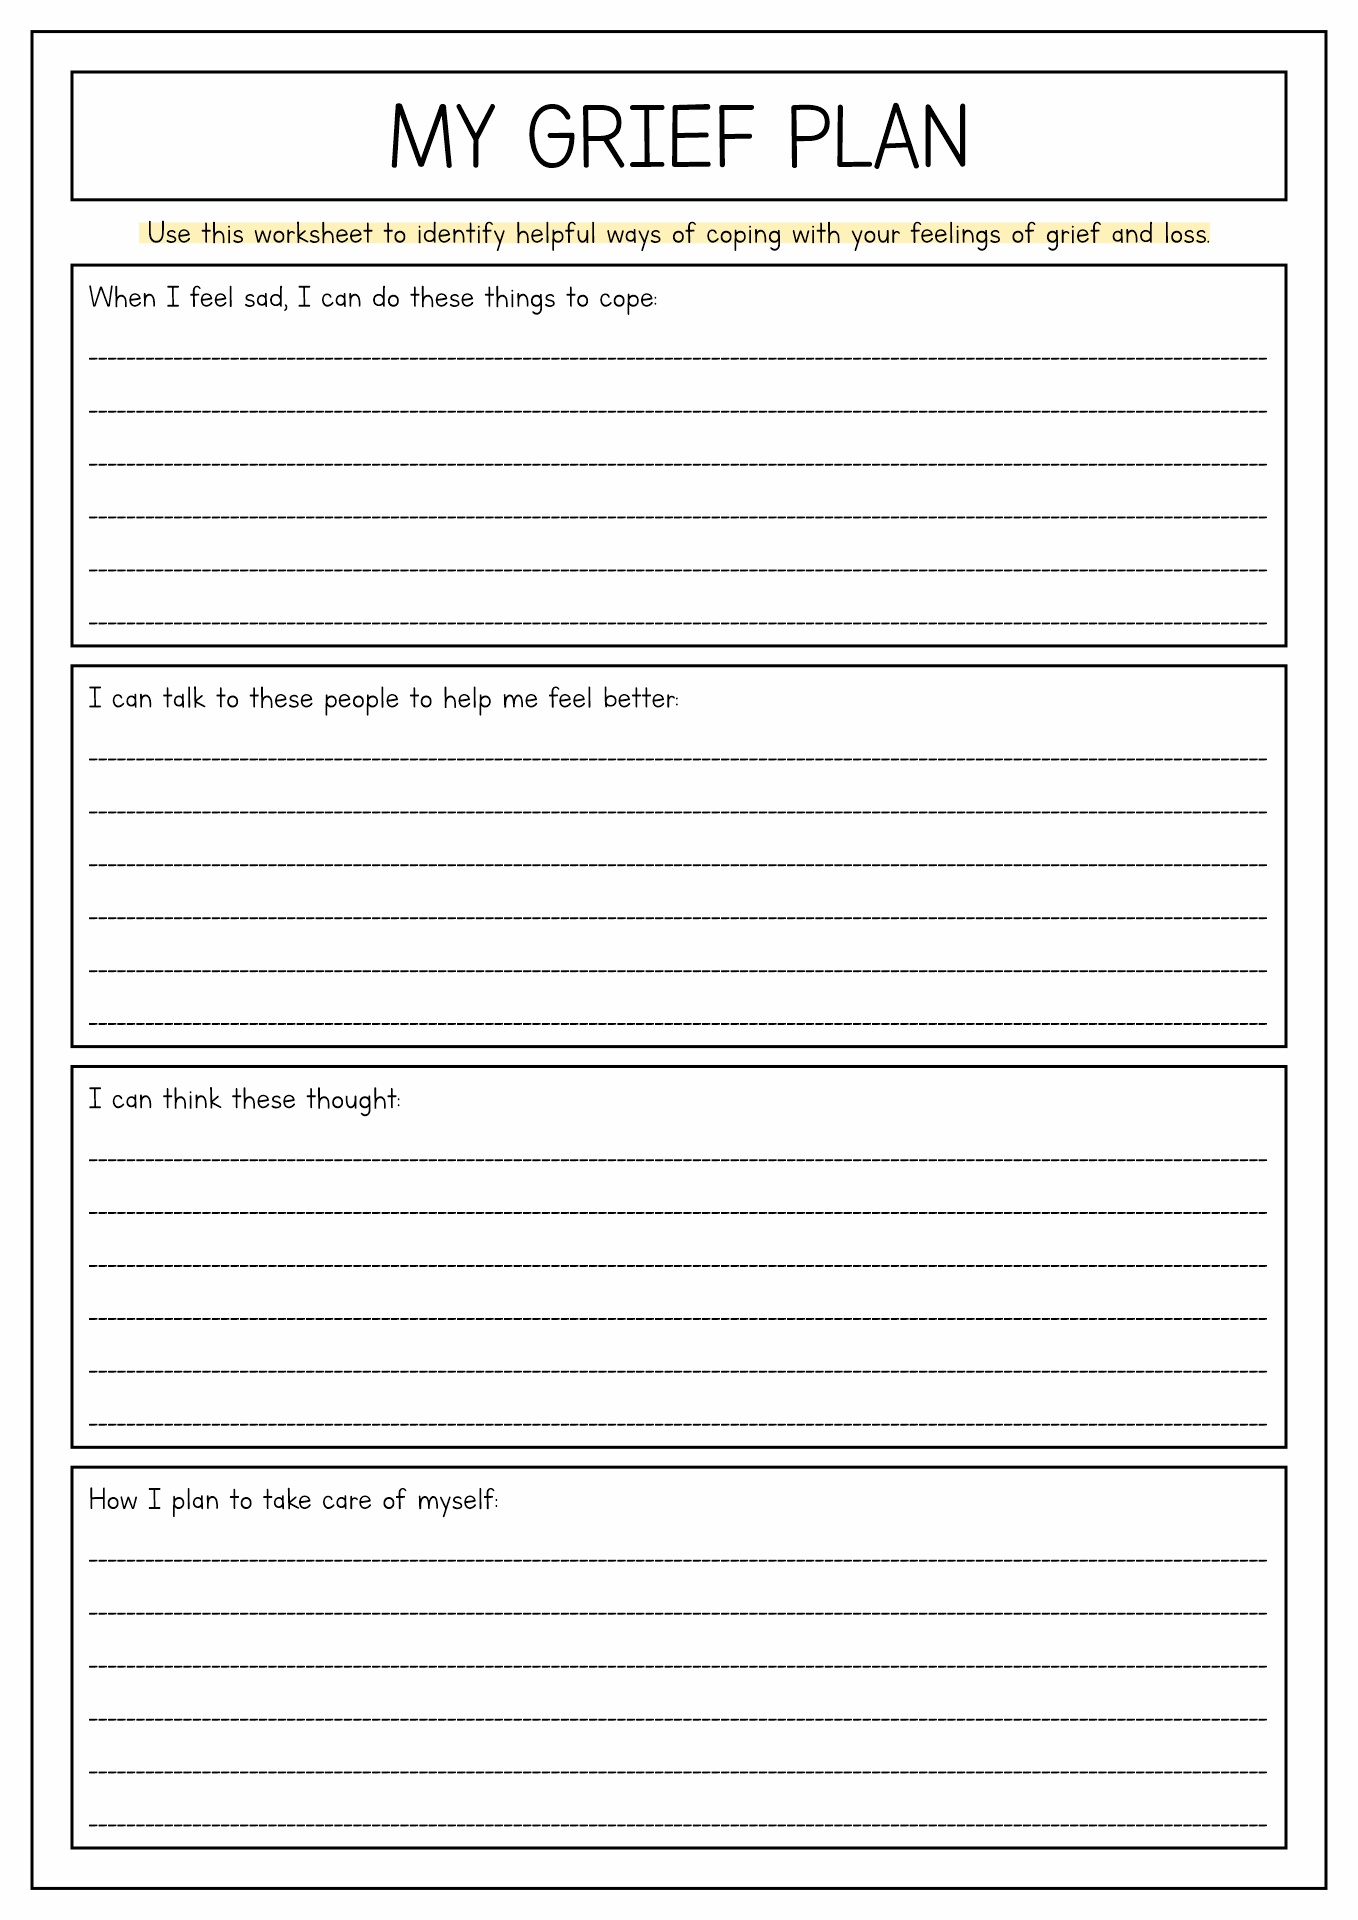 Free Printable Worksheets For Teens And Grief Without Download